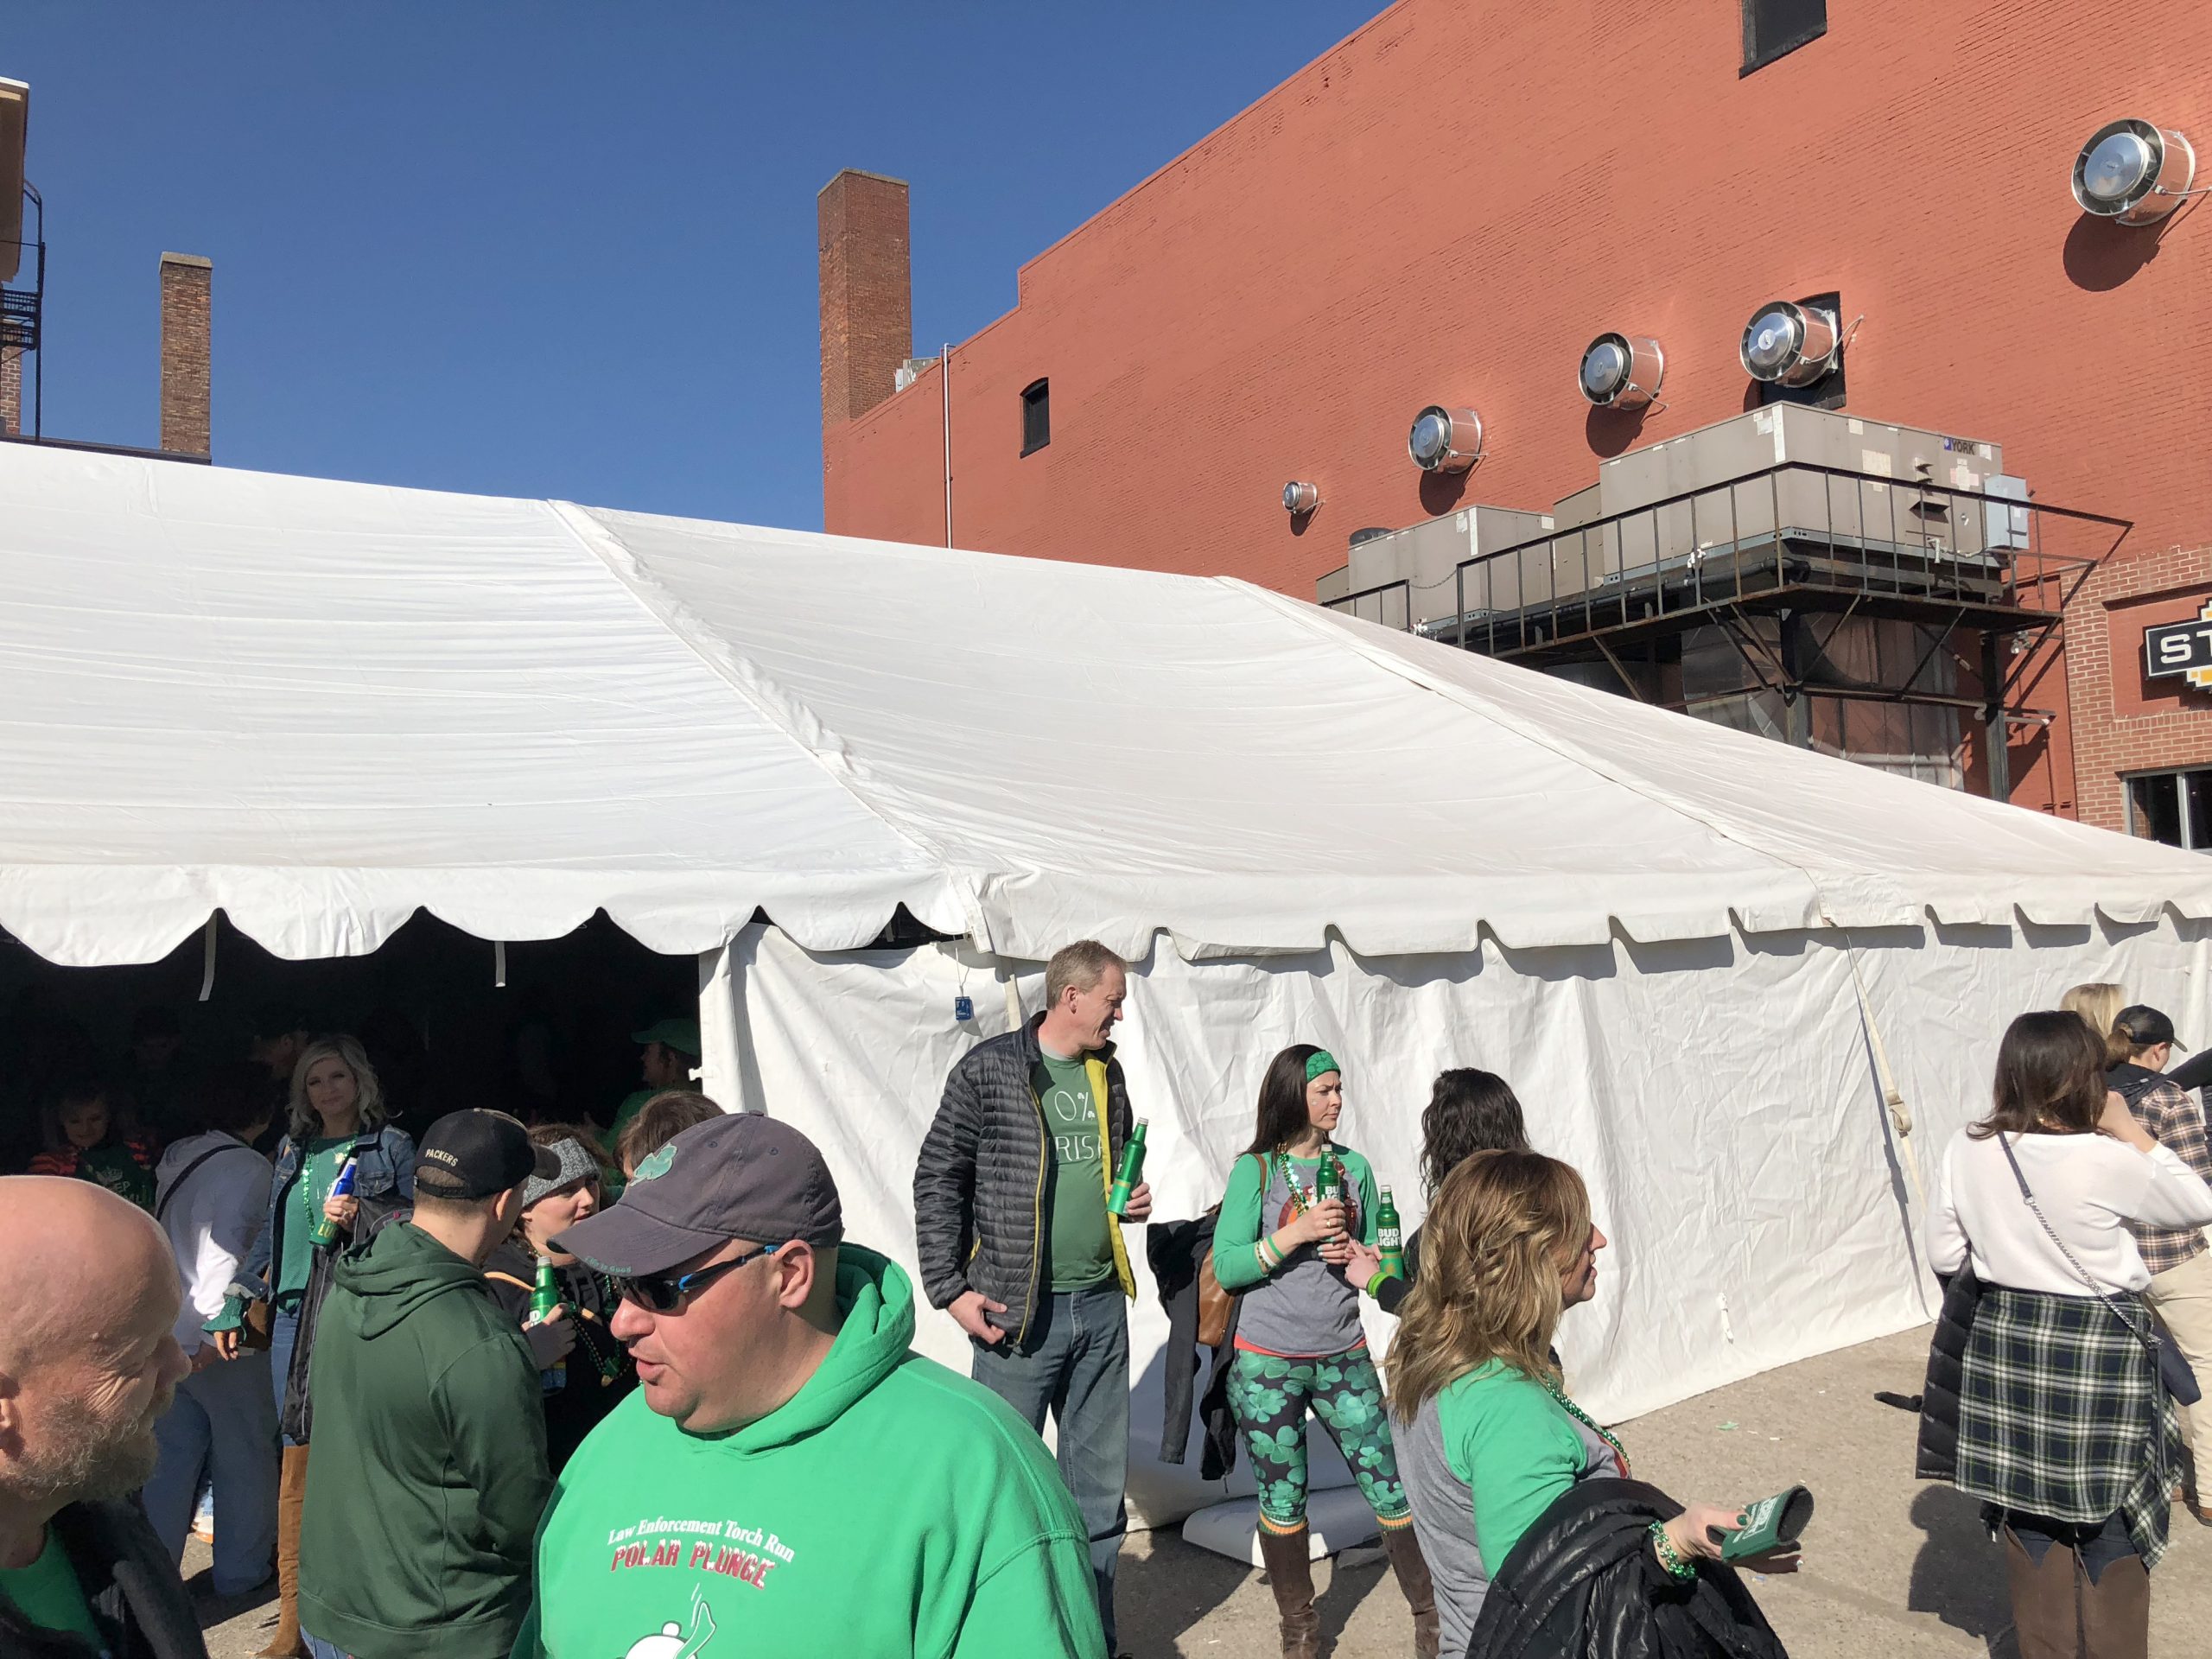 Saint Patrick's Day event under 30' x 75' frame tent at Steve's Old Time Tap in Rock Island, IL